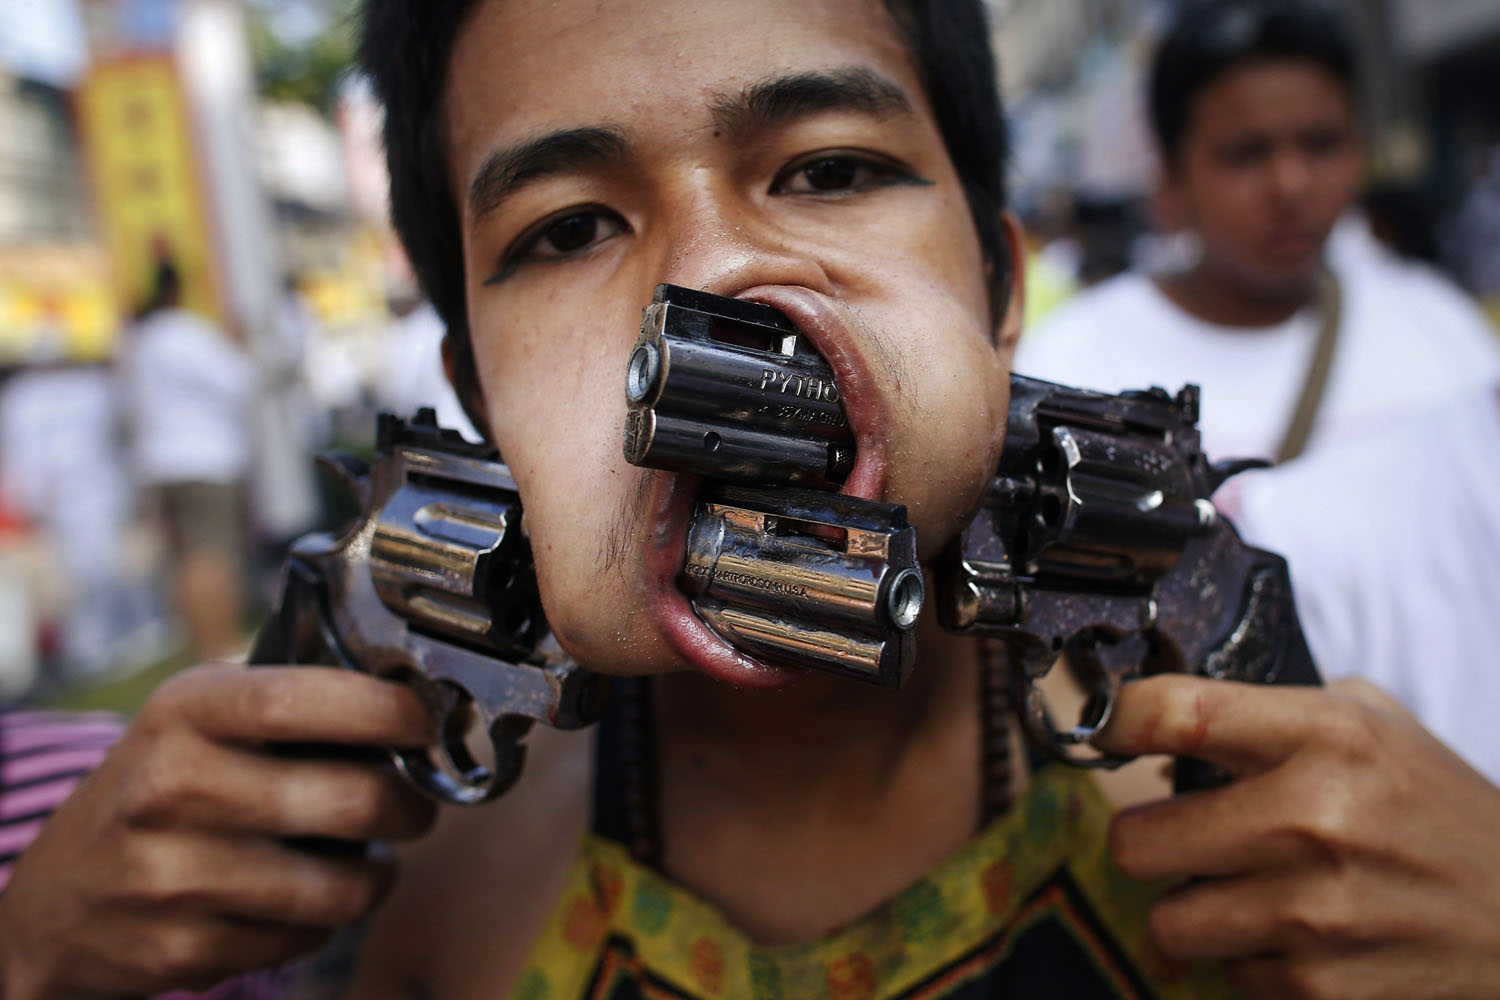 A devotee, with two guns pierced through his cheeks, takes part in a street procession during the annual vegetarian festival in Phuket